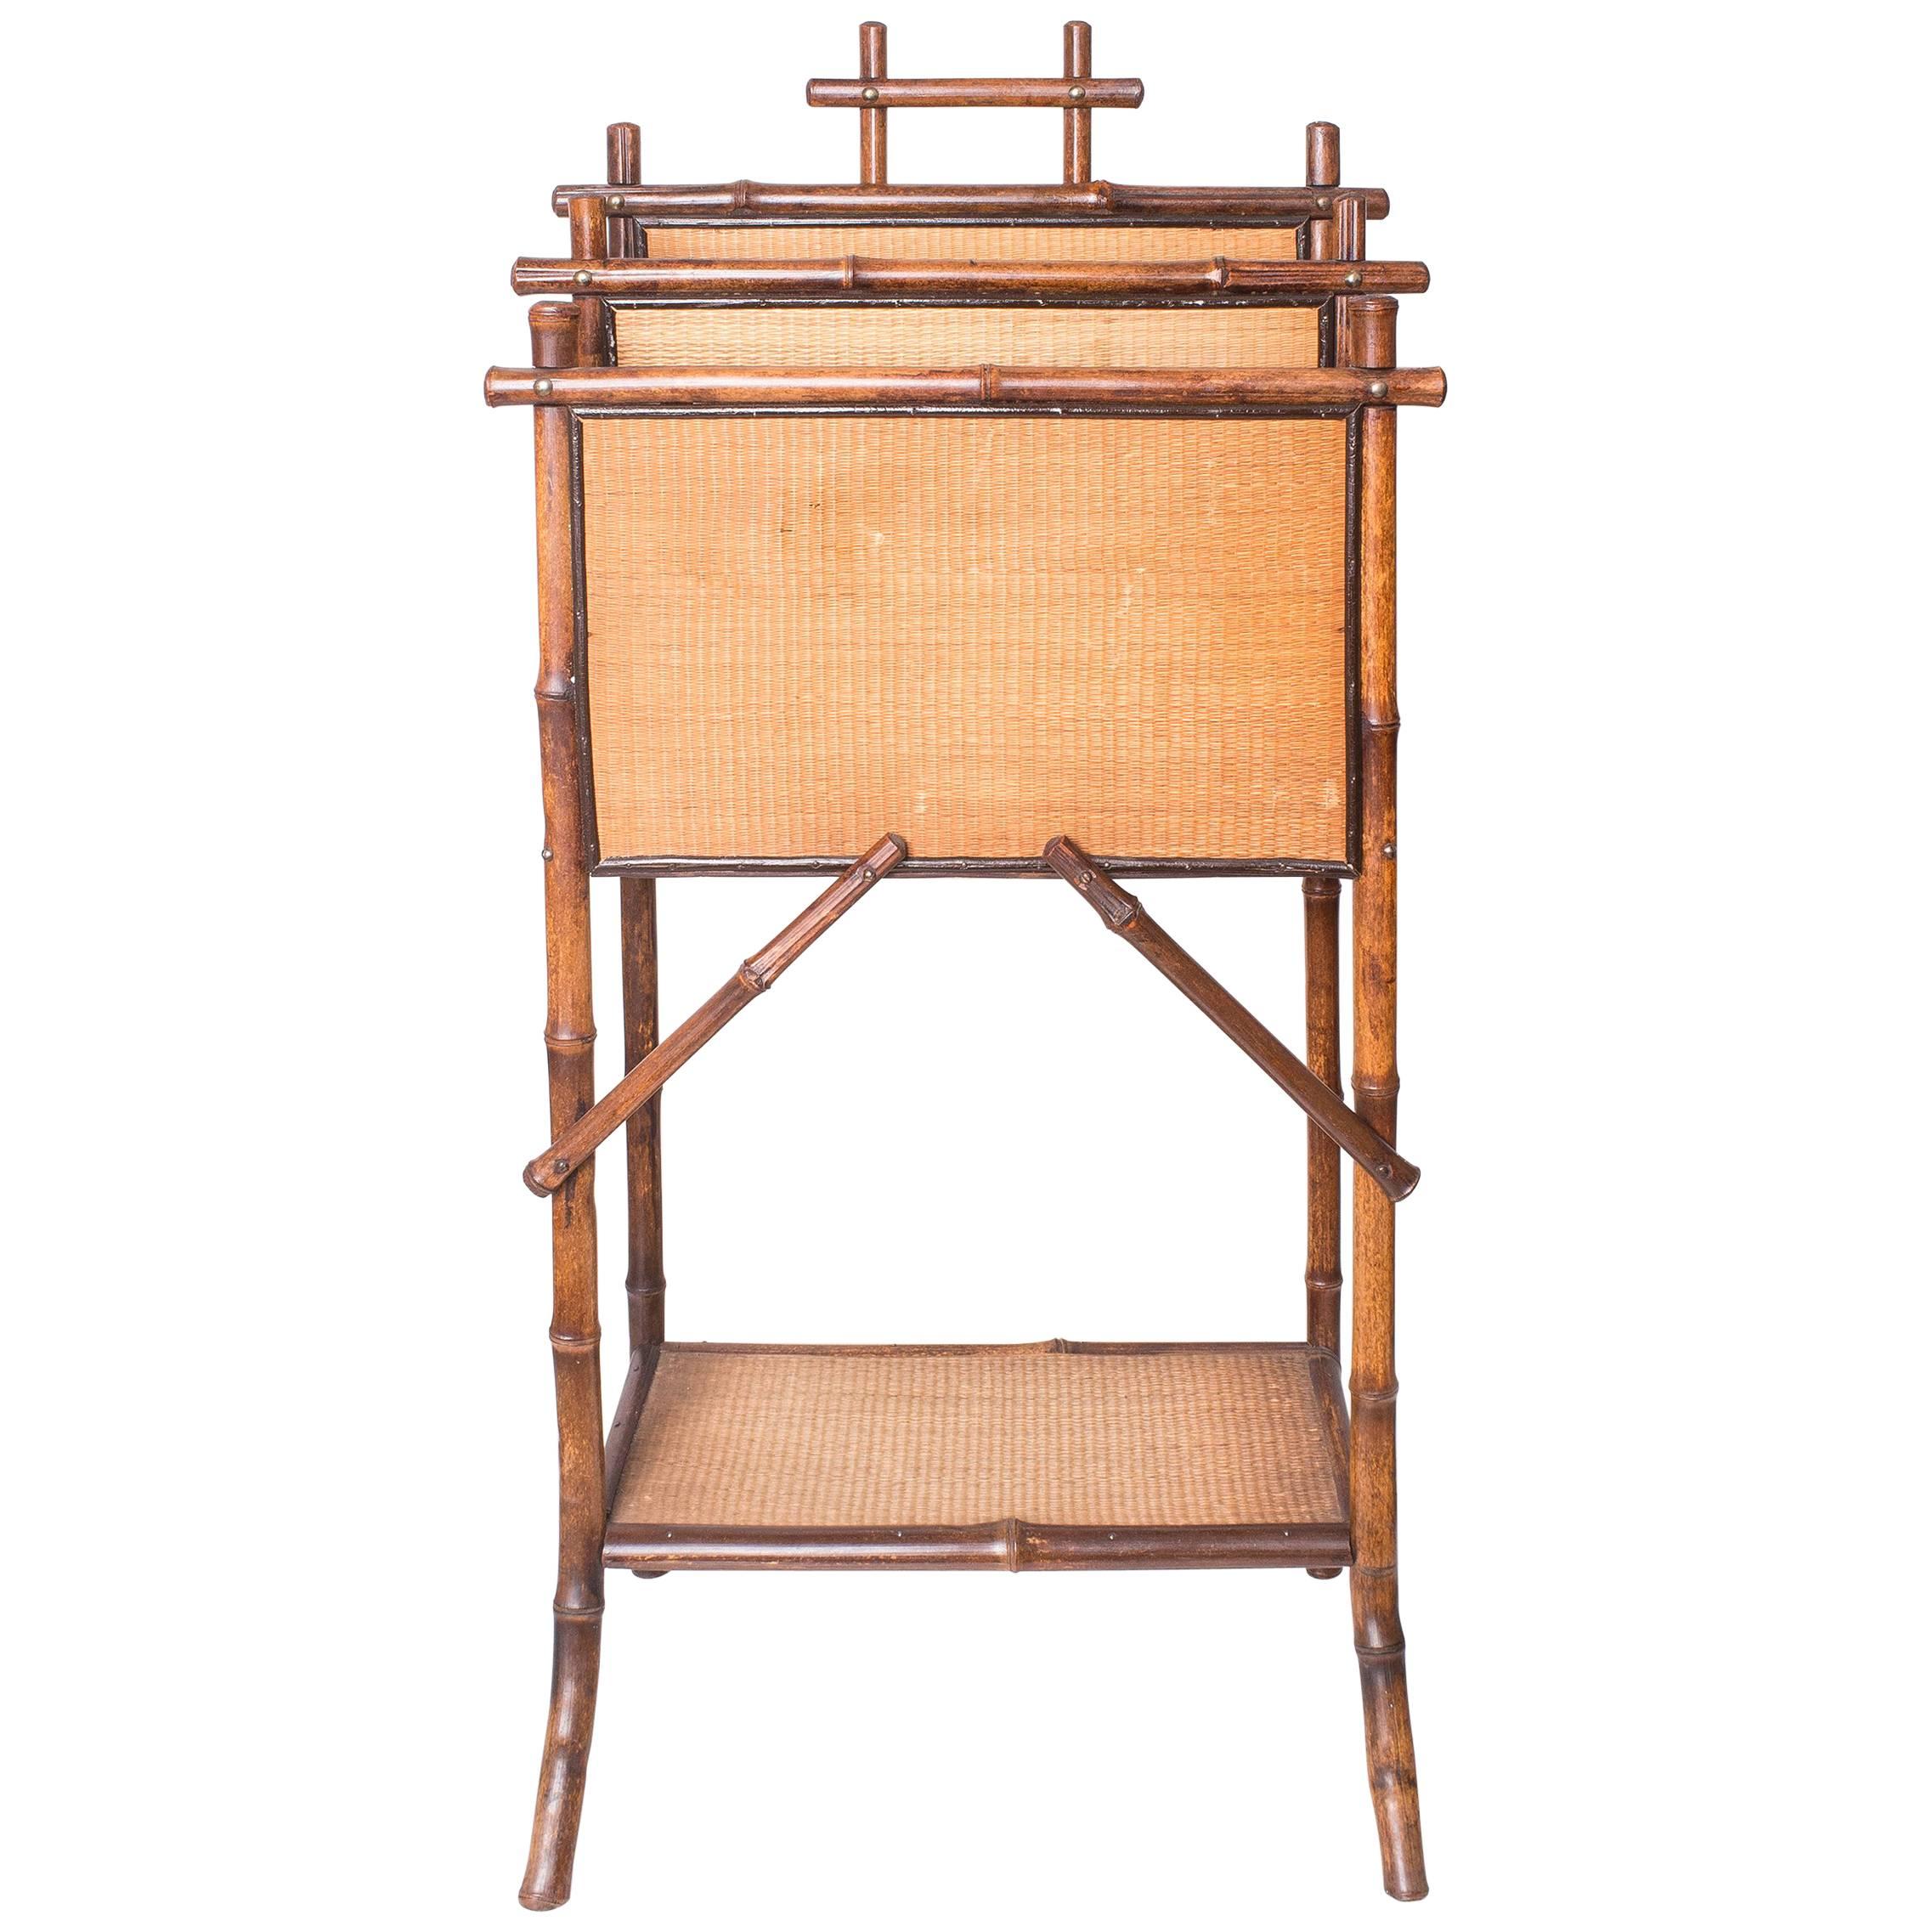  Bamboo Magazine Stand: French or English